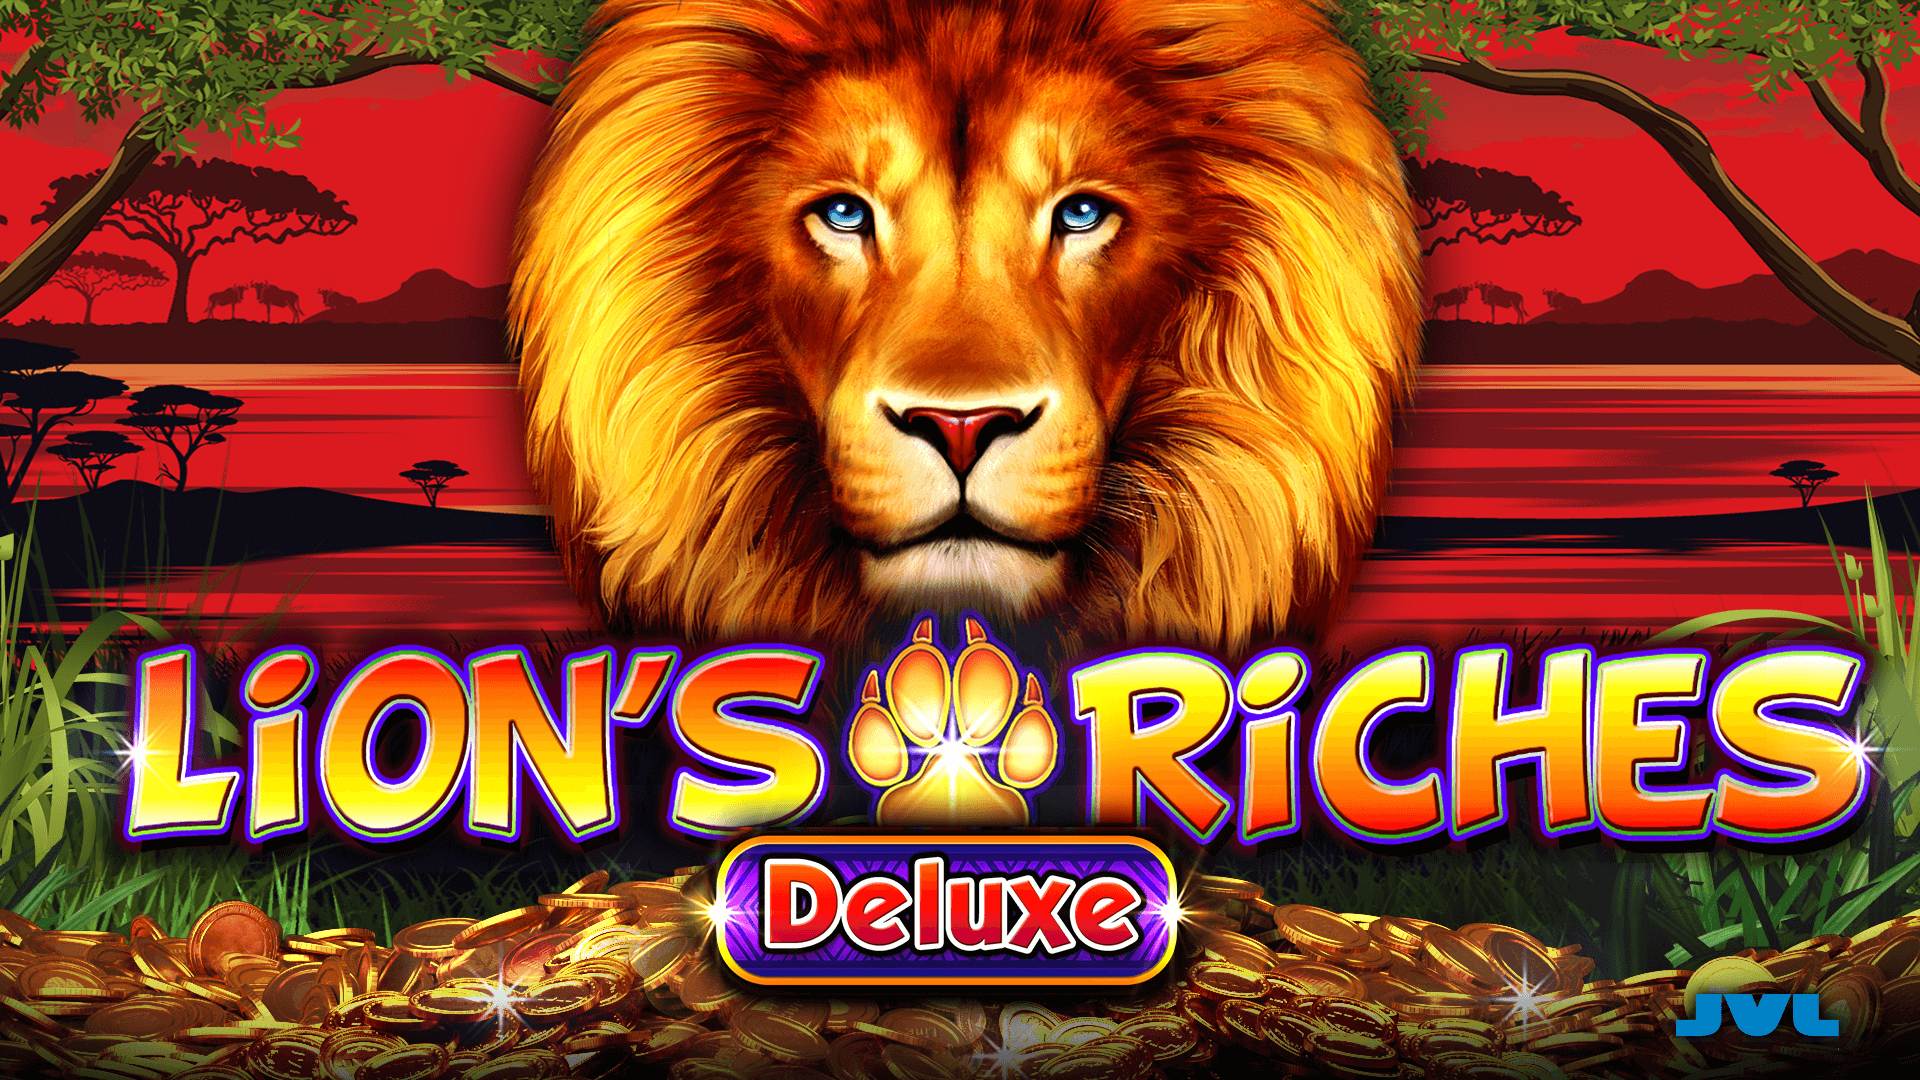 Lions Riches Deluxe Screenshot <br />
<b>Notice</b>:  Undefined variable: key in <b>/var/www/html/wp-content/themes/armadillo/page-game.php</b> on line <b>37</b><br />
1